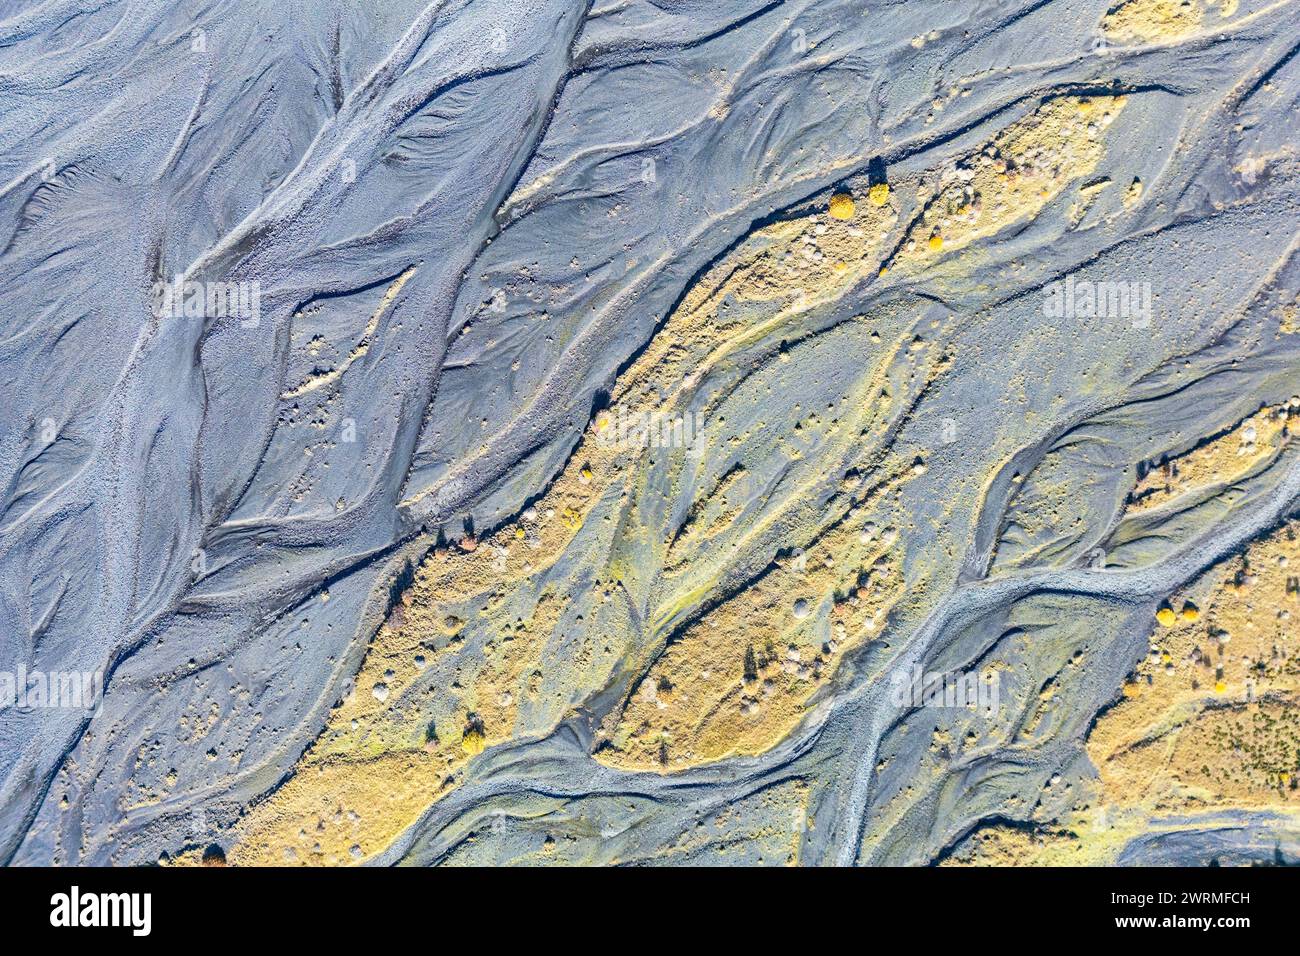 An aerial shot capturing the intricate patterns of meandering rivers and streams with sediment deposits, highlighting the natural beauty of the Northe Stock Photo